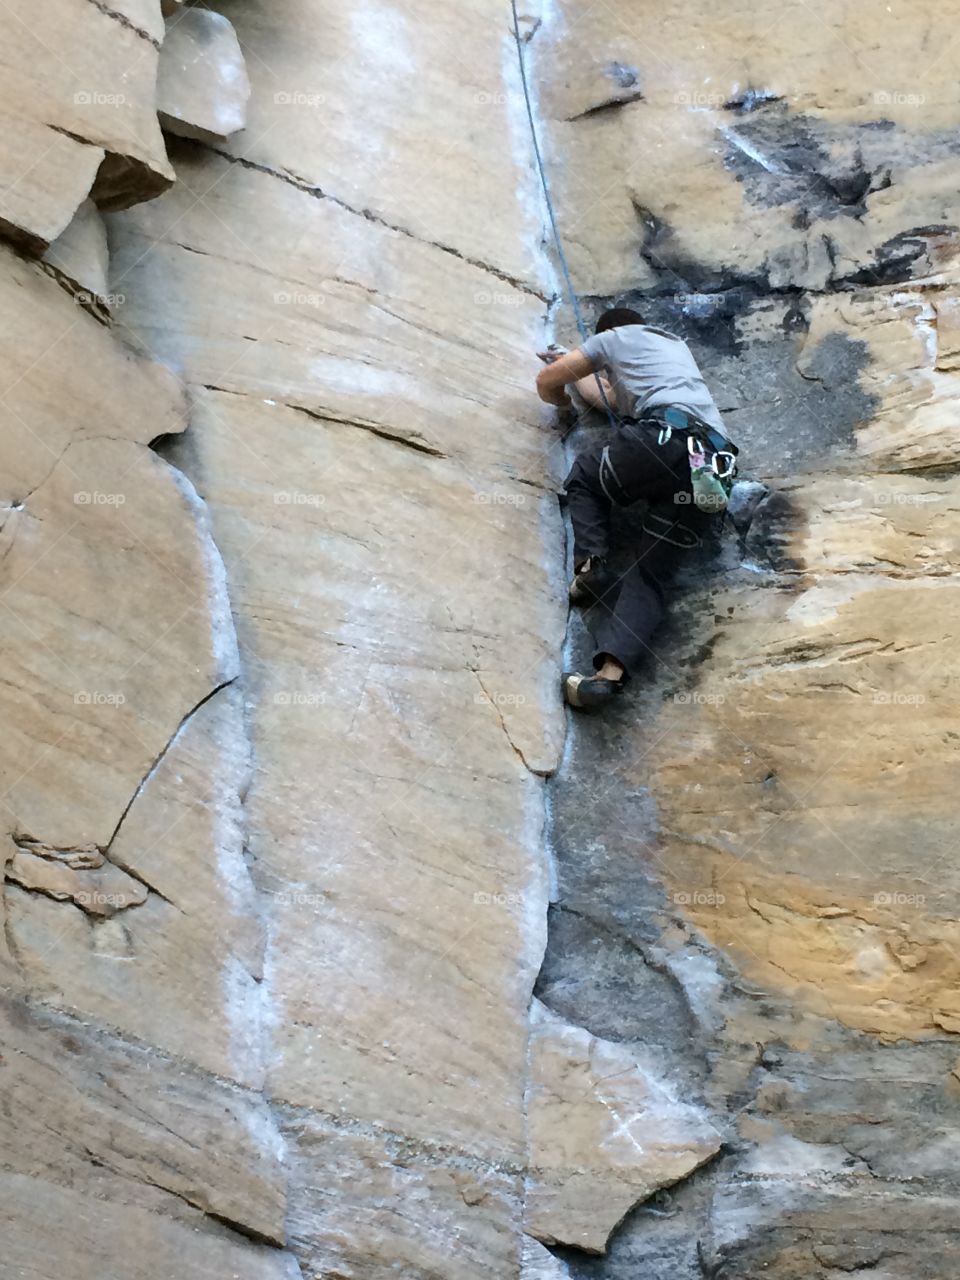 Crack climbing at the Red River Gorge